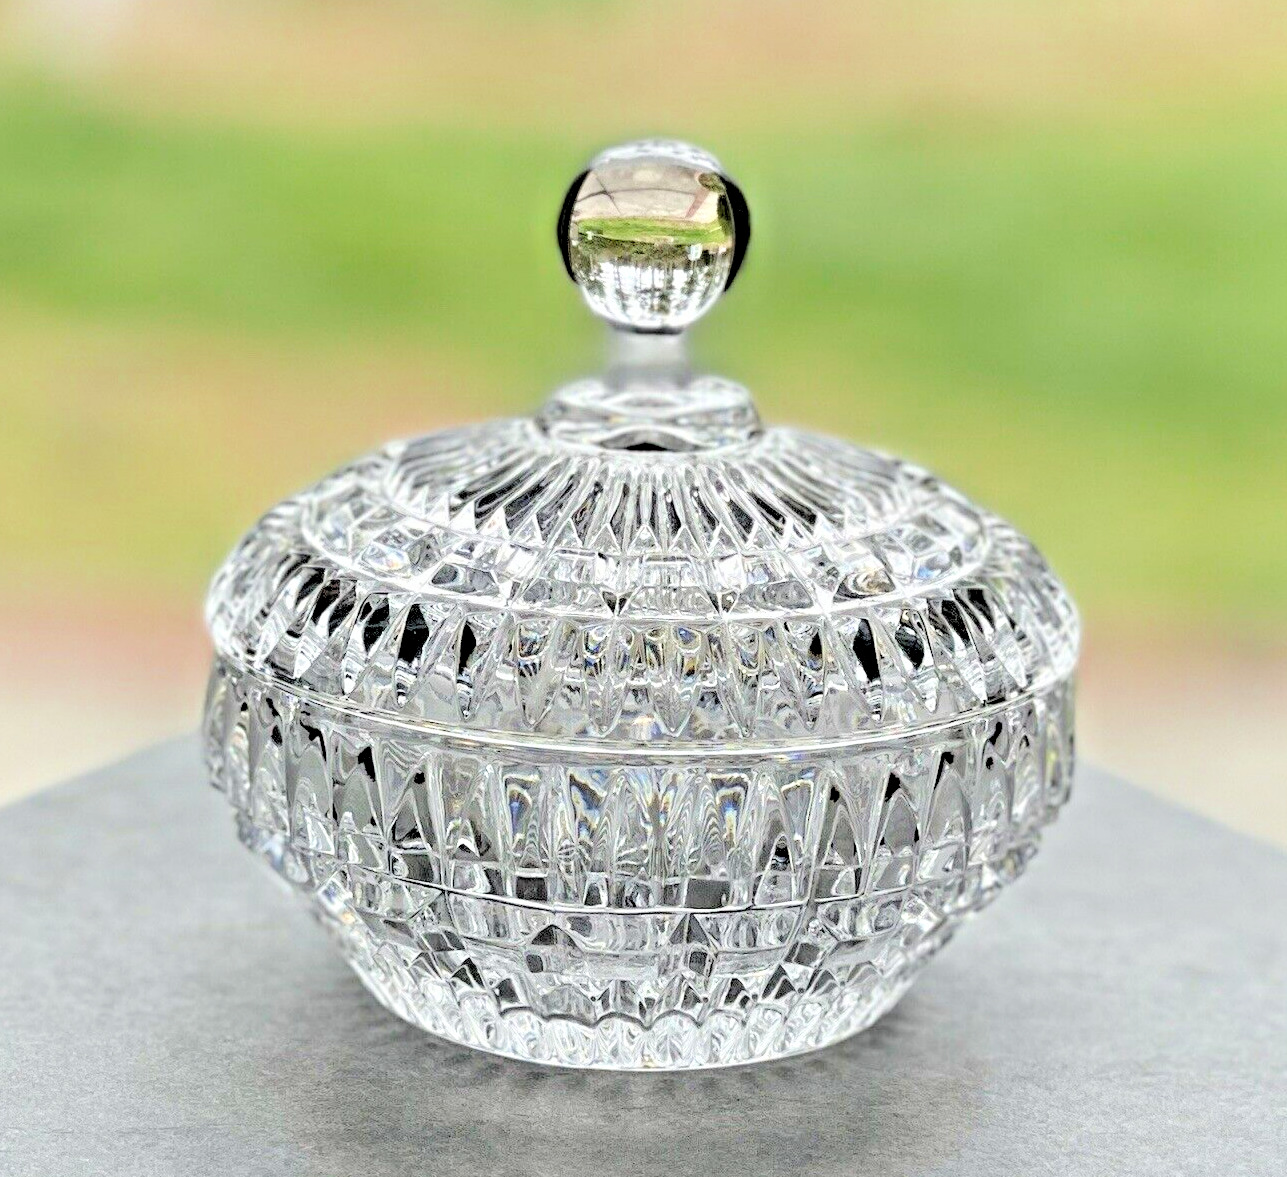 VTG Glass Trinket Candy Dish Sugar Bowl with Lid Crystal Clear Pressed Glass